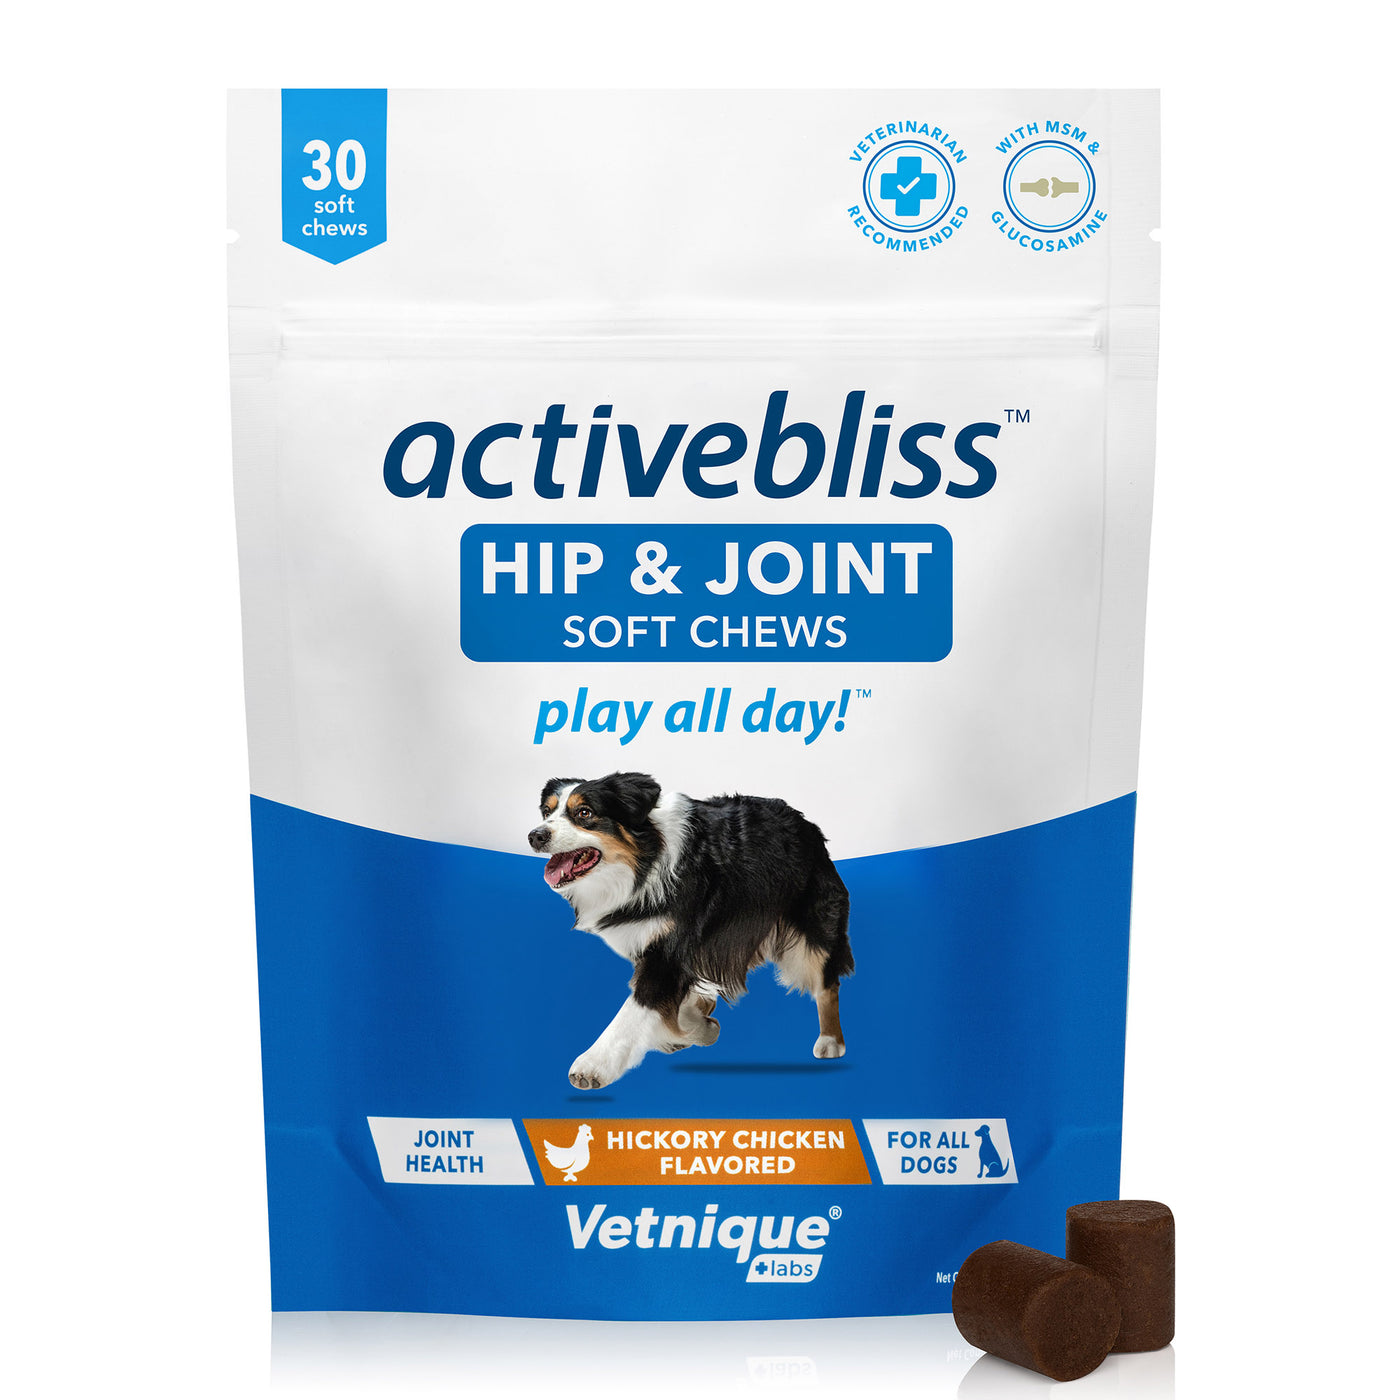 Activebliss™ Hip & Joint Supplement for Dogs